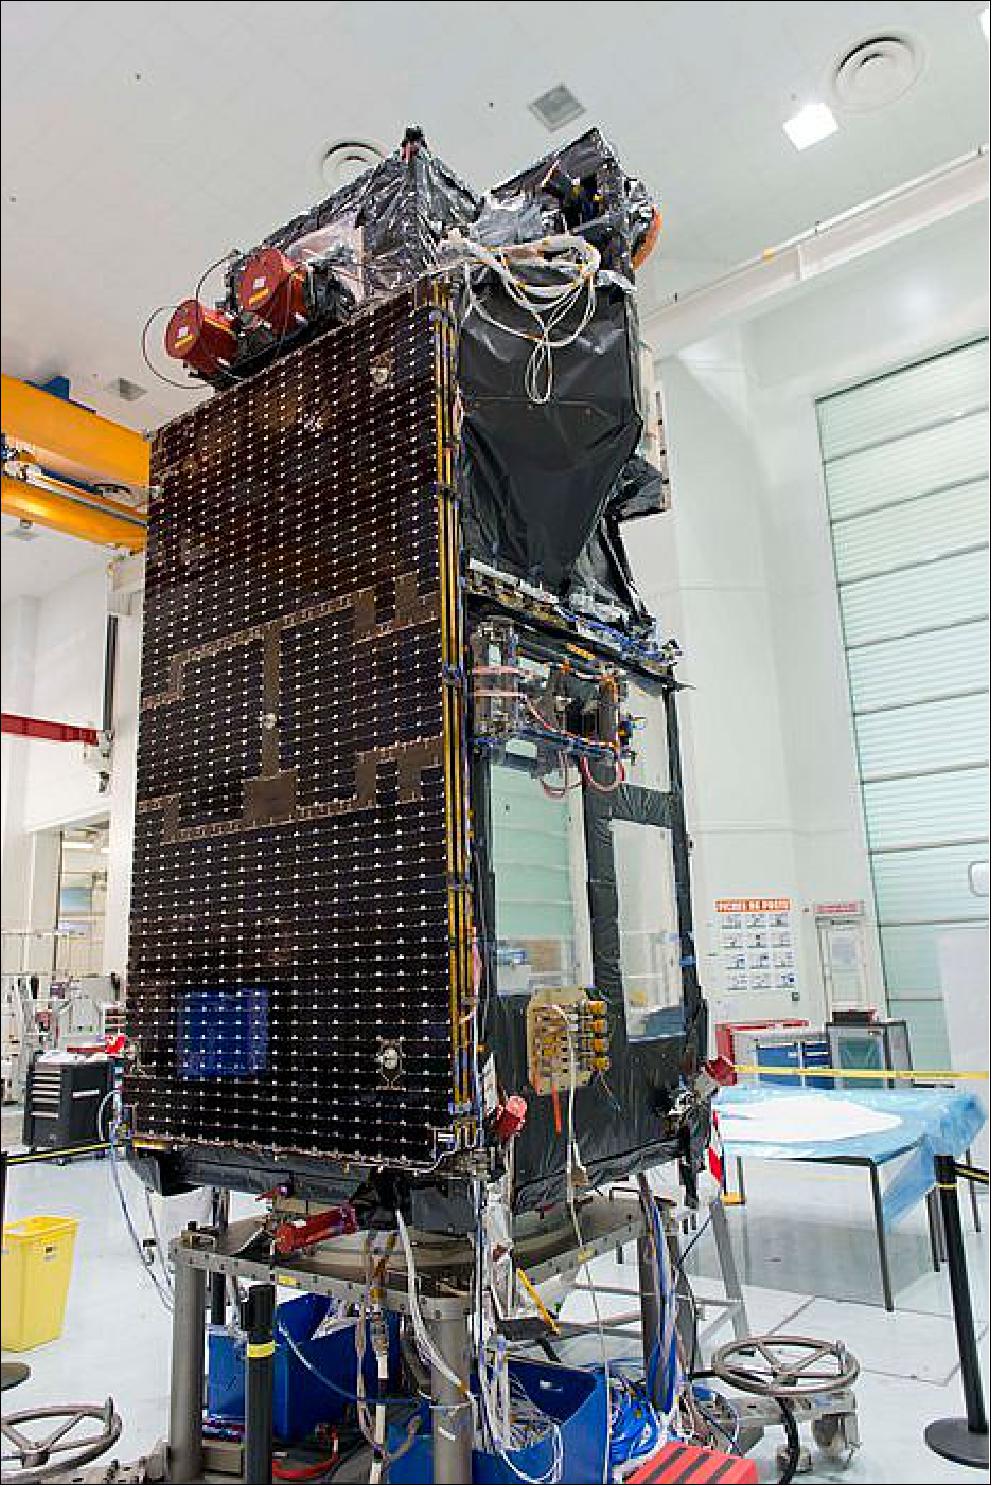 Figure 6: Photo of the Sentinel-3A spacecraft in the cleanroom of Thales Alenia Space in Cannes, France with the solar wings attached (image credit: ESA, A. Le Floc’h) 20)